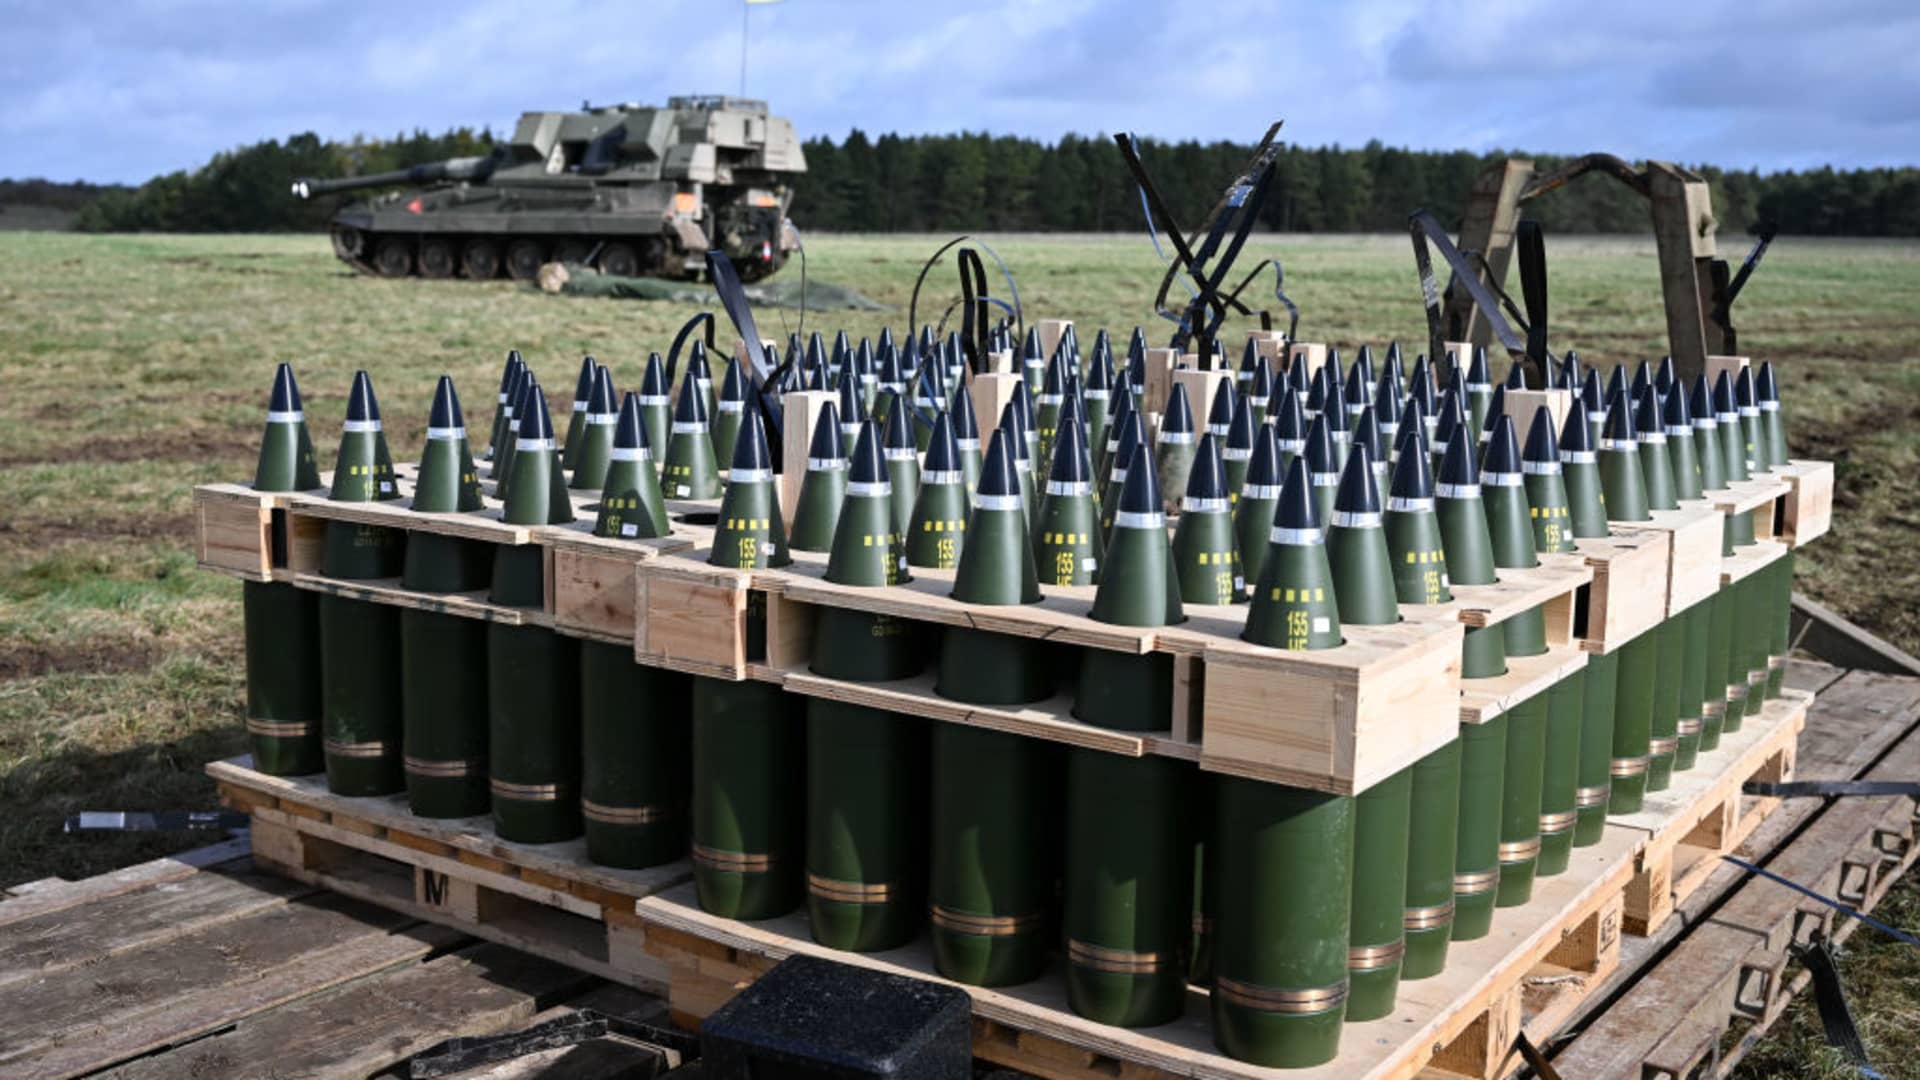 Ammunition is seen during live fire training with the AS90, on March 24, 2023 in South West, England. 